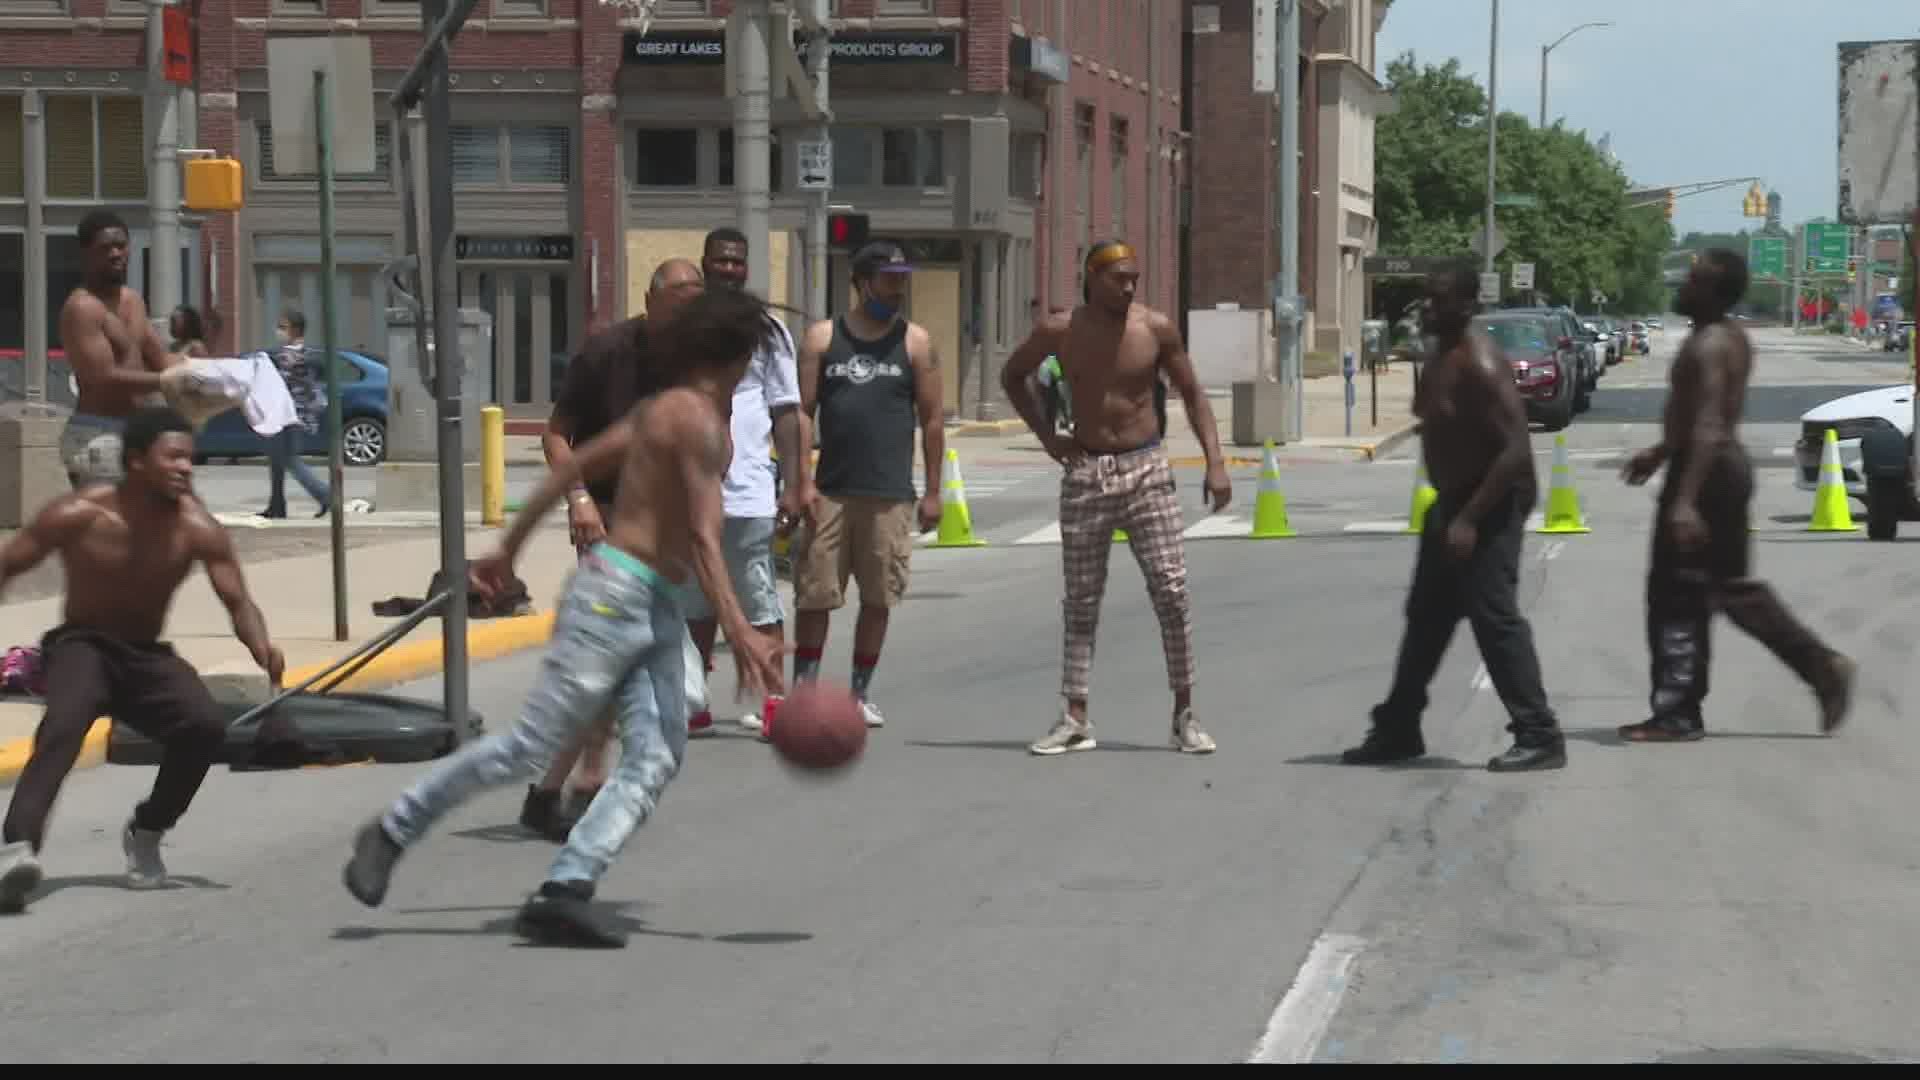 Dozens of Hoosiers came downtown for a community block party celebrating love and unity today.